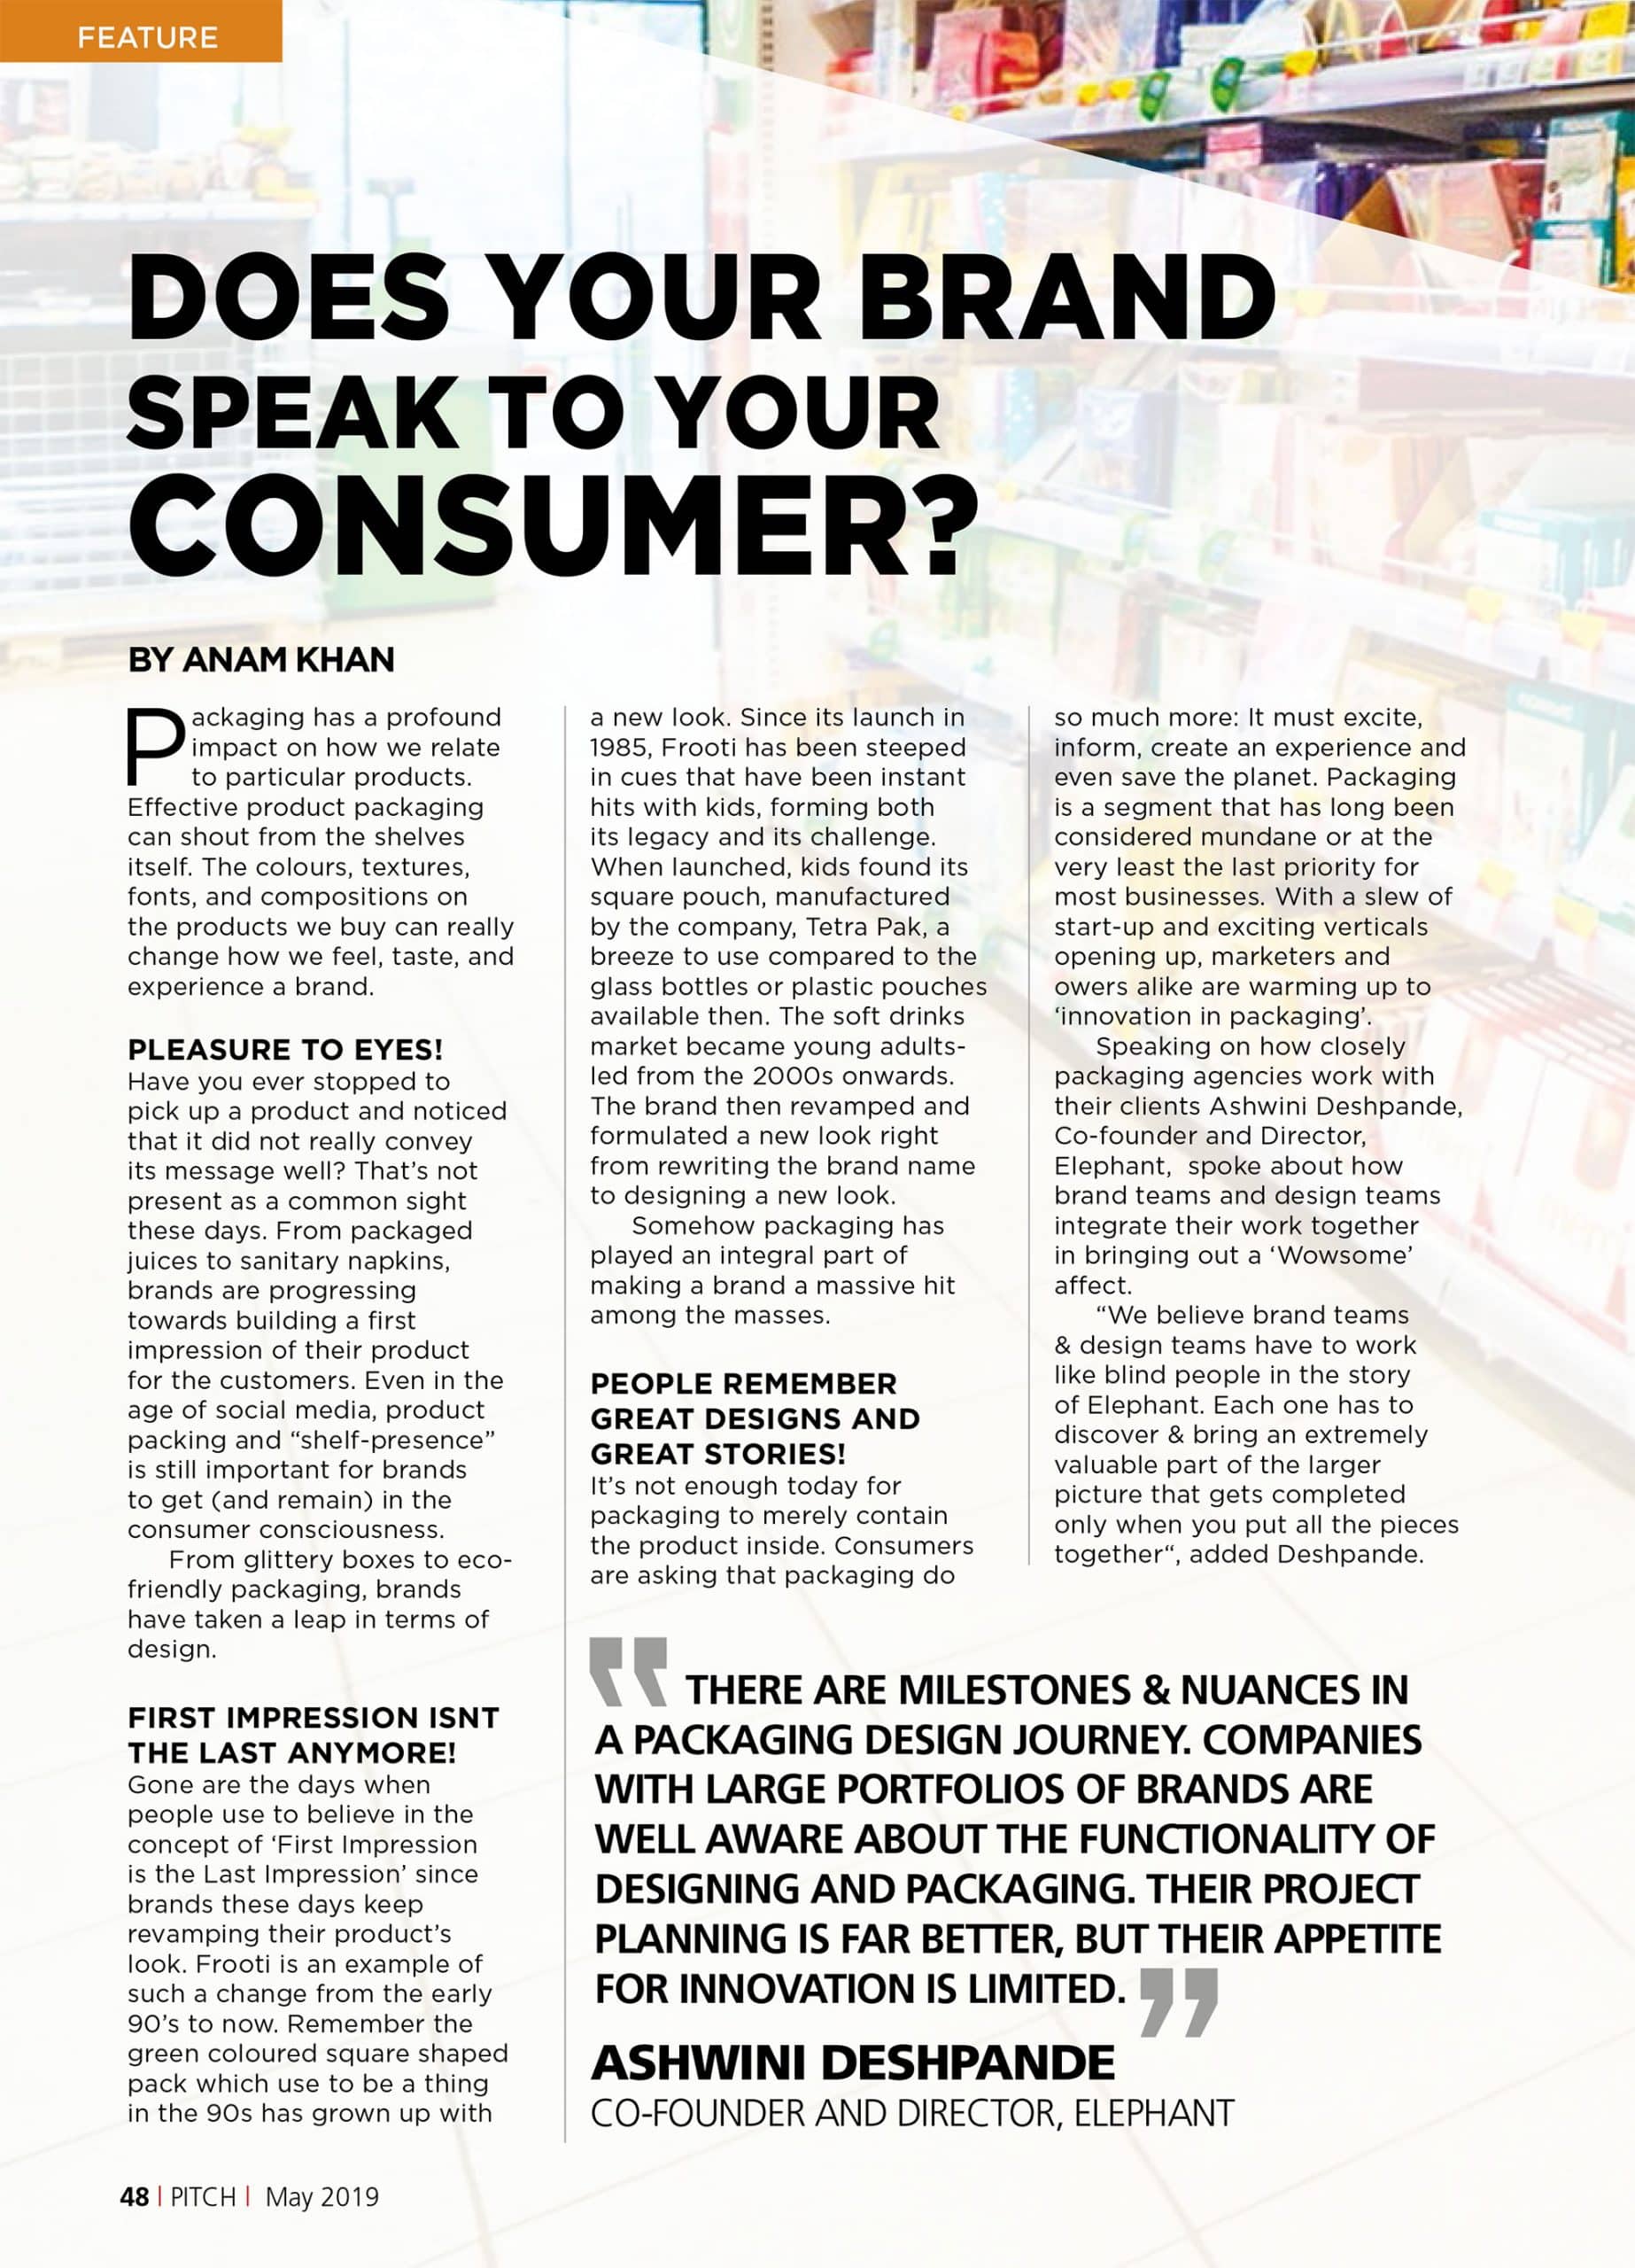 Does Your Brand Speak To Your Consumer? - Reports PITCH